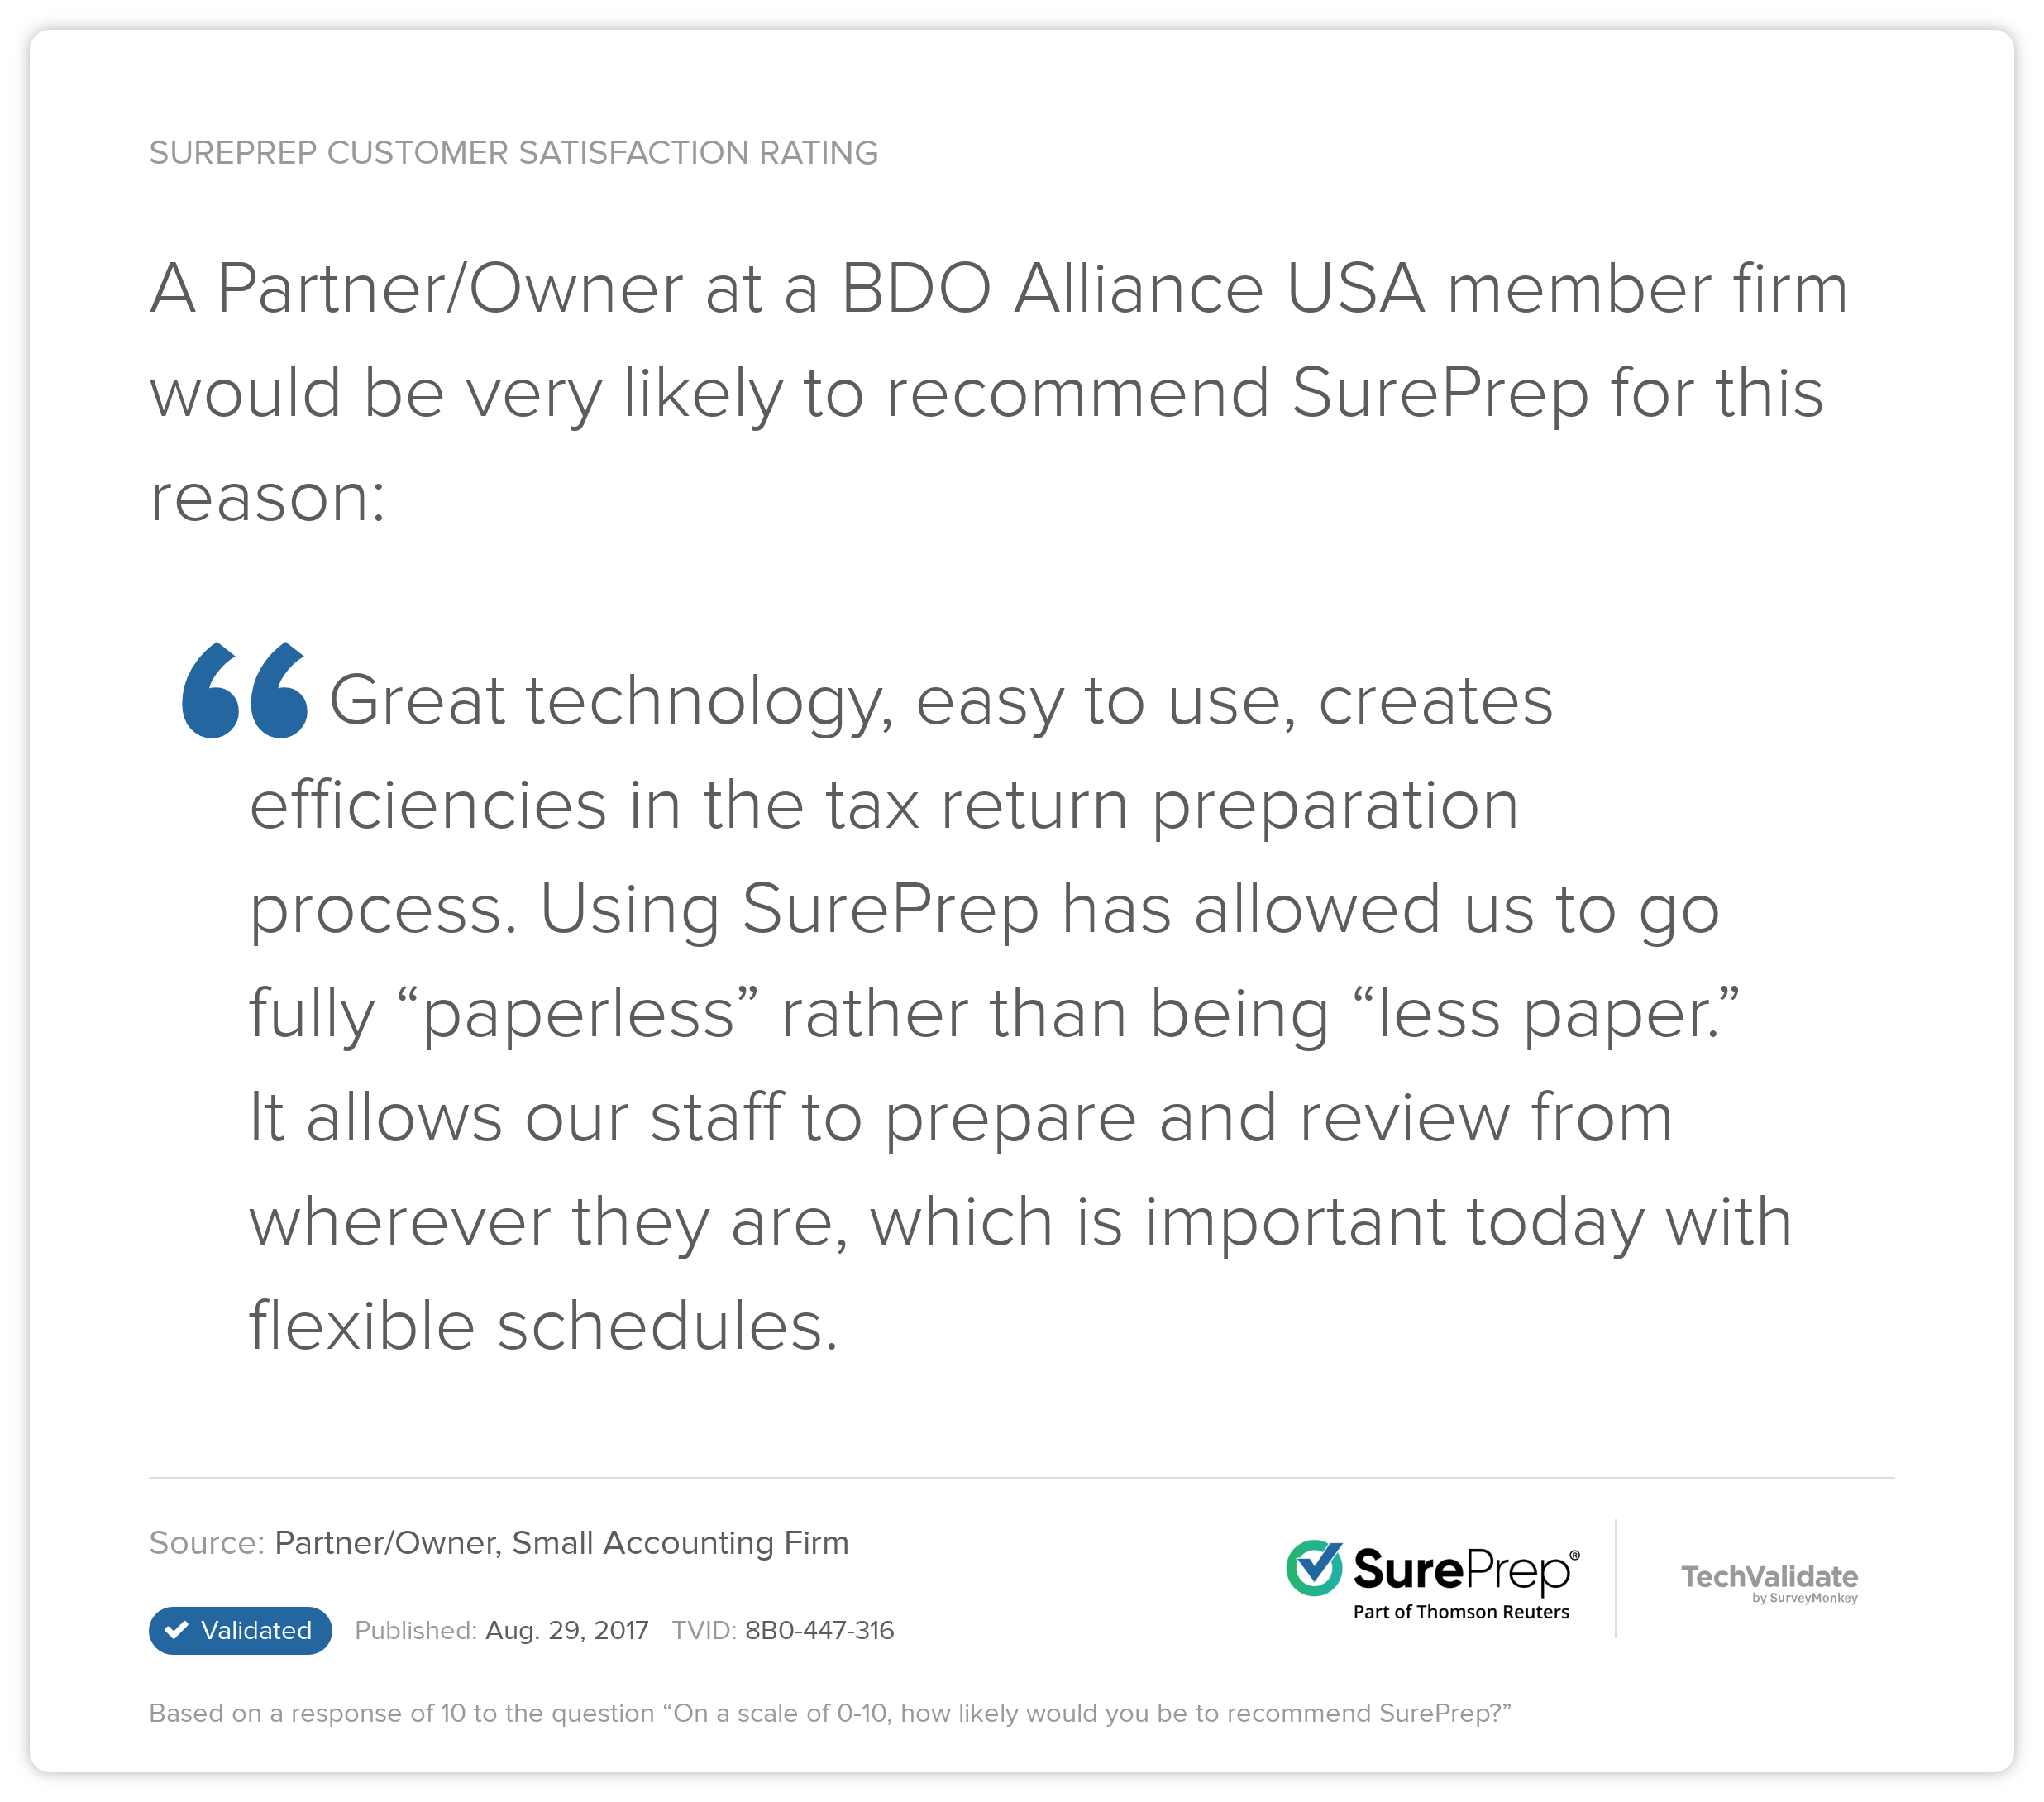 BDO Customer Review: "Great technology, easy to use, creates efficiencies in the tax return preparation process. Using SurePrep has allowed us to go fully 'paperless' rather than being 'less paper.; It allows our staff to prepare and review from wherever they are, which is important today with flexible schedules."